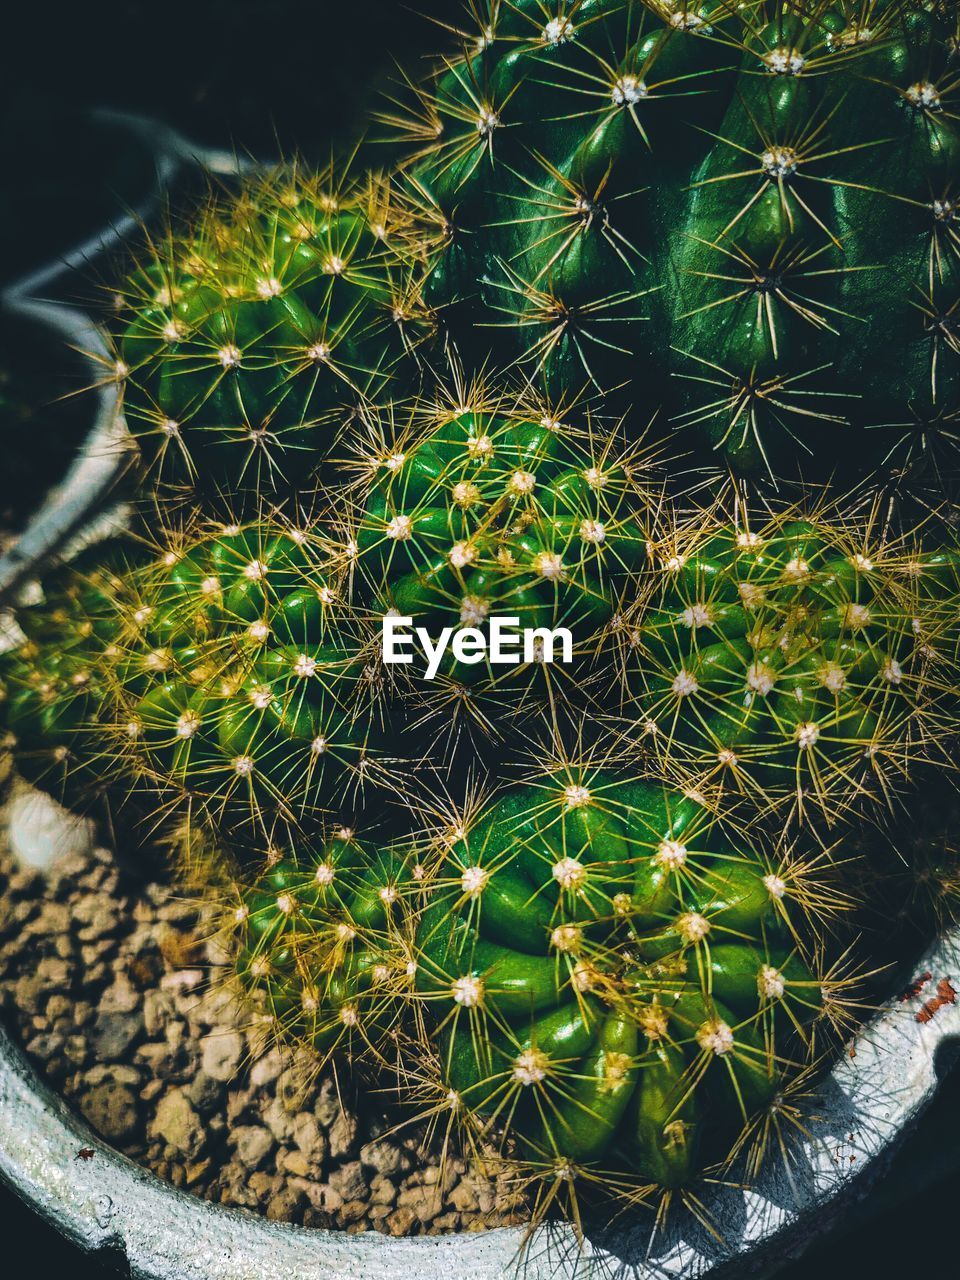 cactus, succulent plant, growth, thorn, plant, potted plant, green, sharp, nature, no people, barrel cactus, flower, spiked, houseplant, thorns, spines, and prickles, beauty in nature, high angle view, close-up, flowerpot, day, outdoors